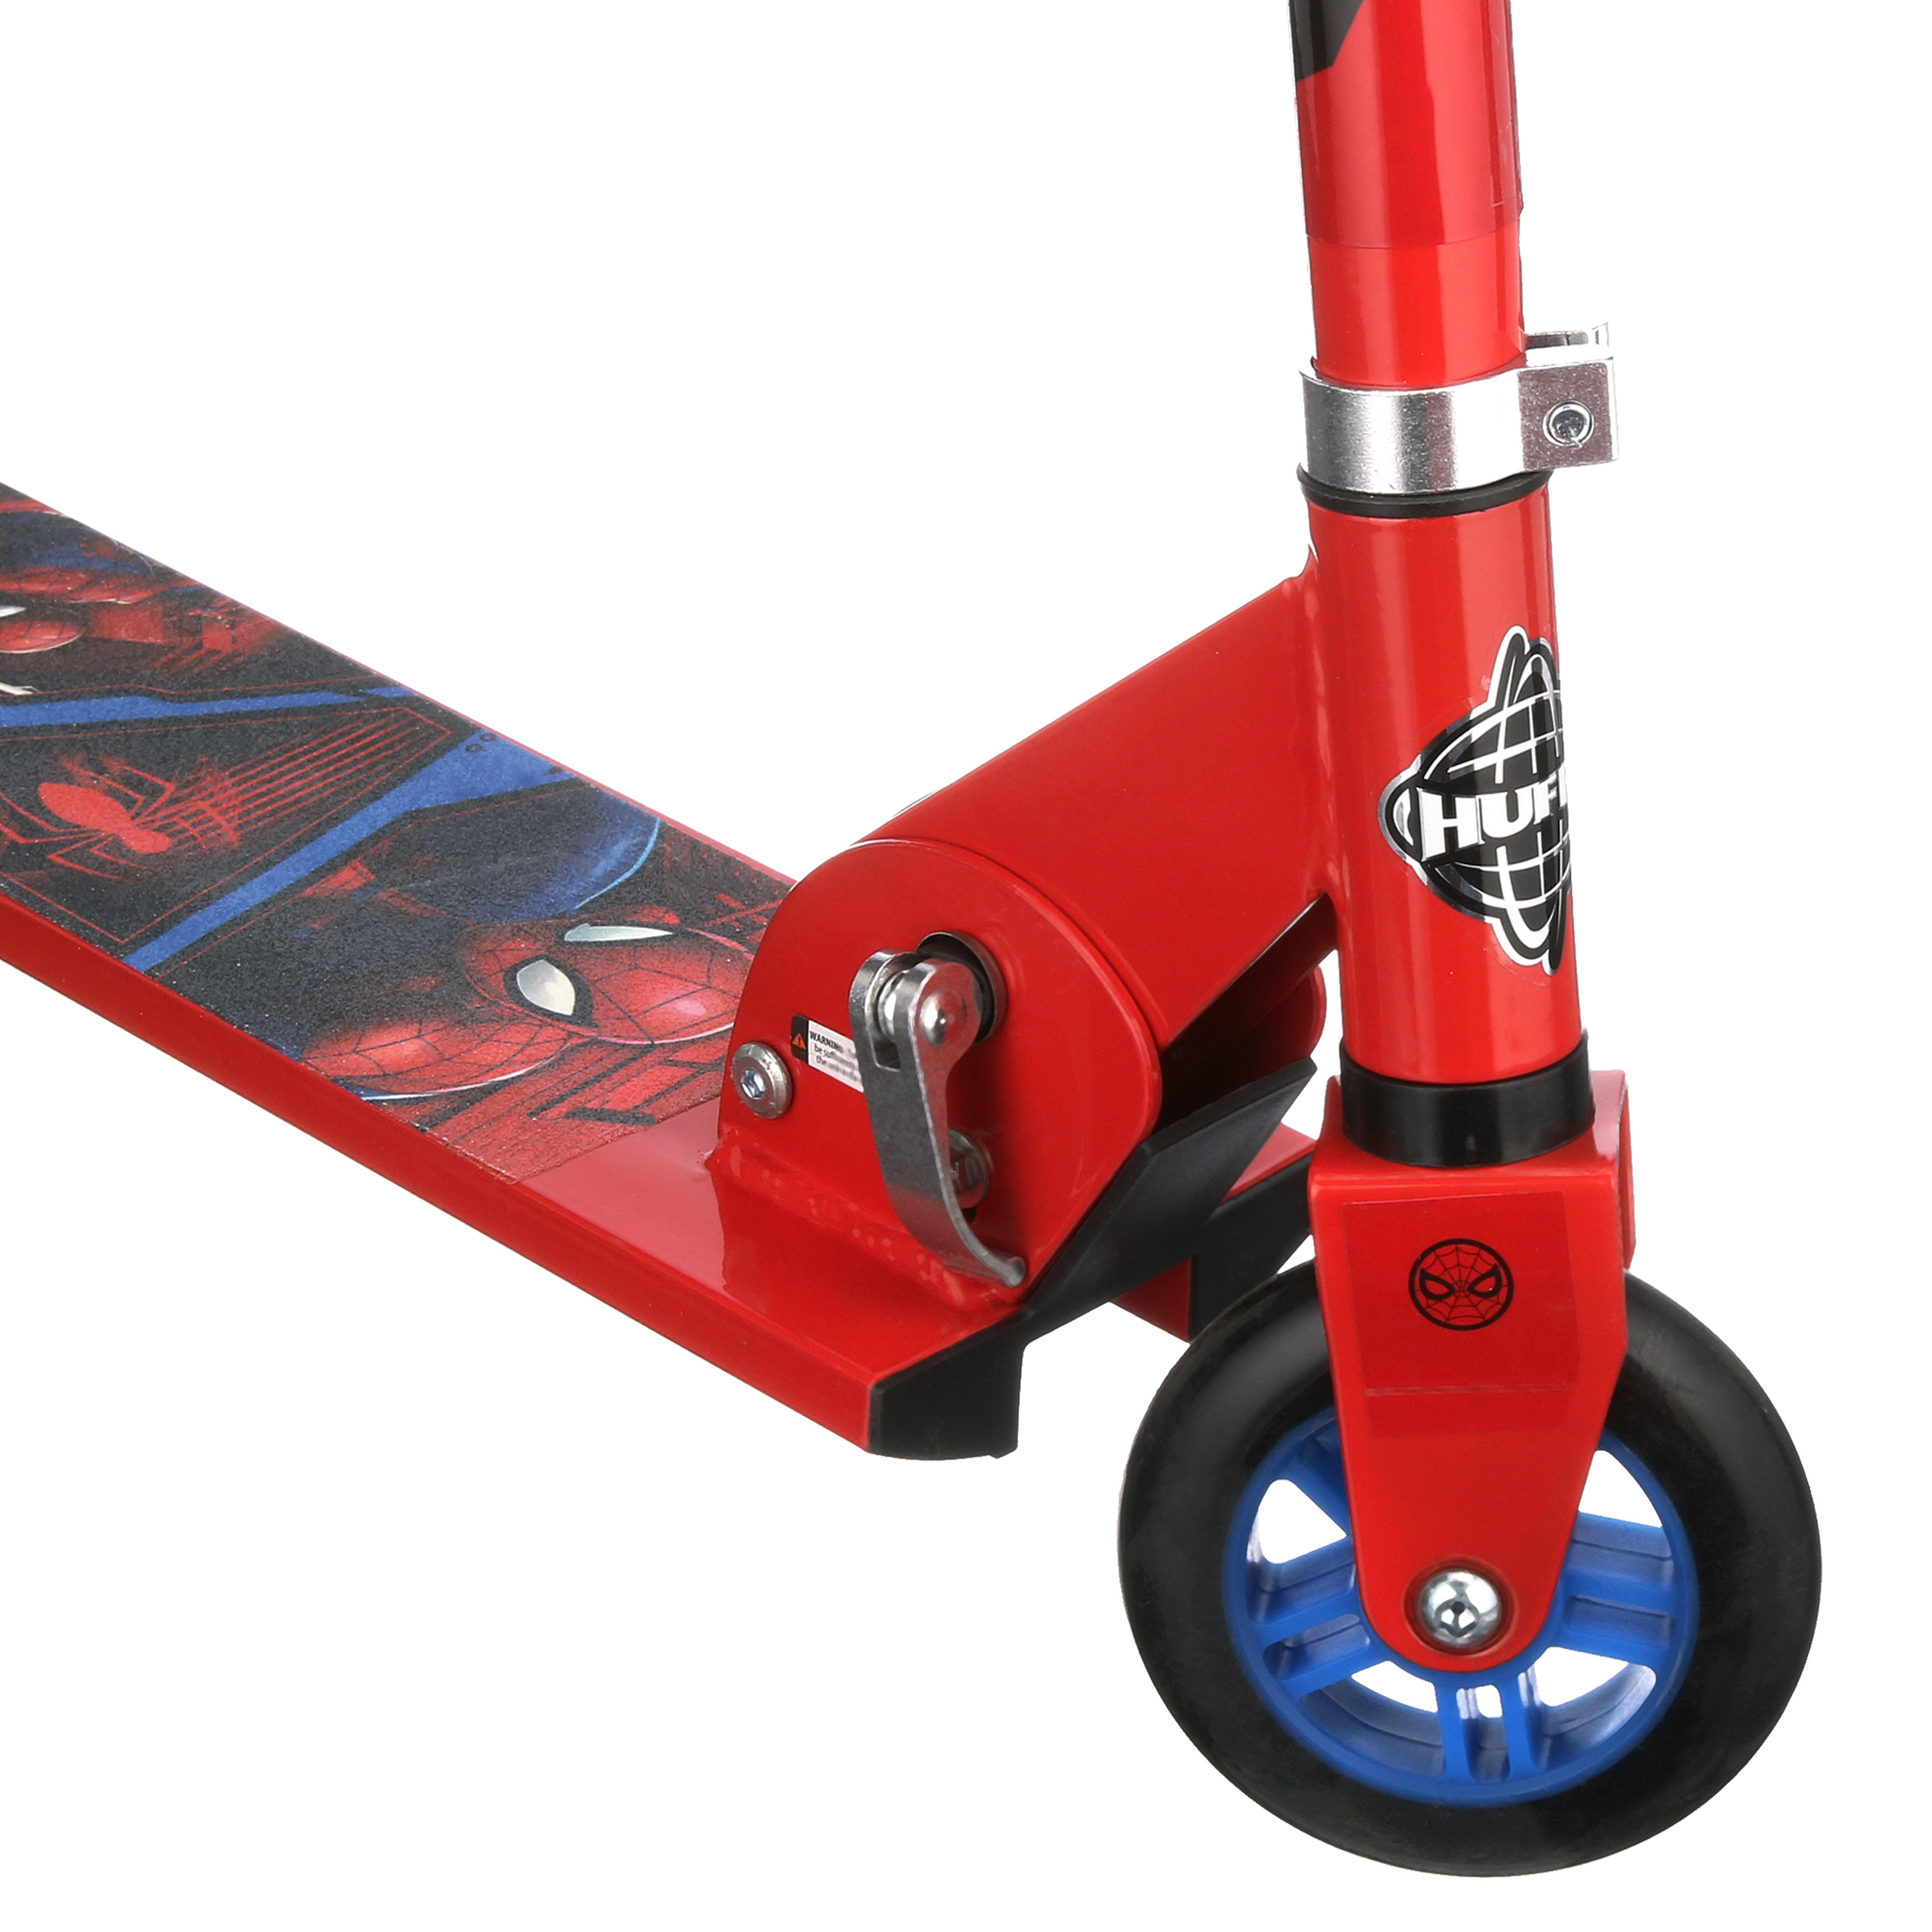 Marvel Spider-Man Inline Folding Kick Scooter for Boys, by Huffy - image 5 of 9